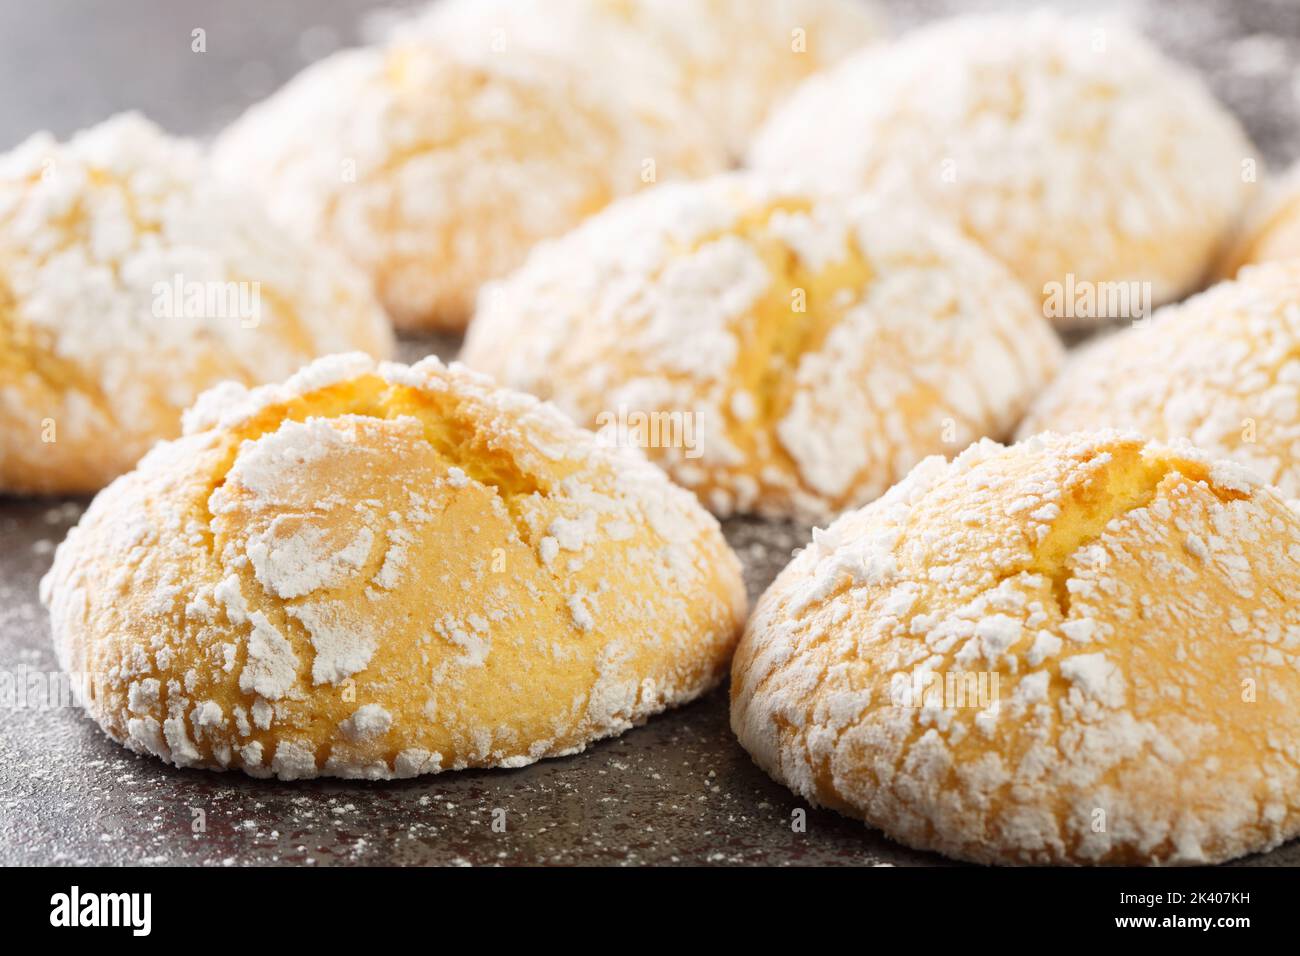 Close-up of cracked lemon biscuits sprinkled with powdered sugar close-up on the table. horizontal Stock Photo